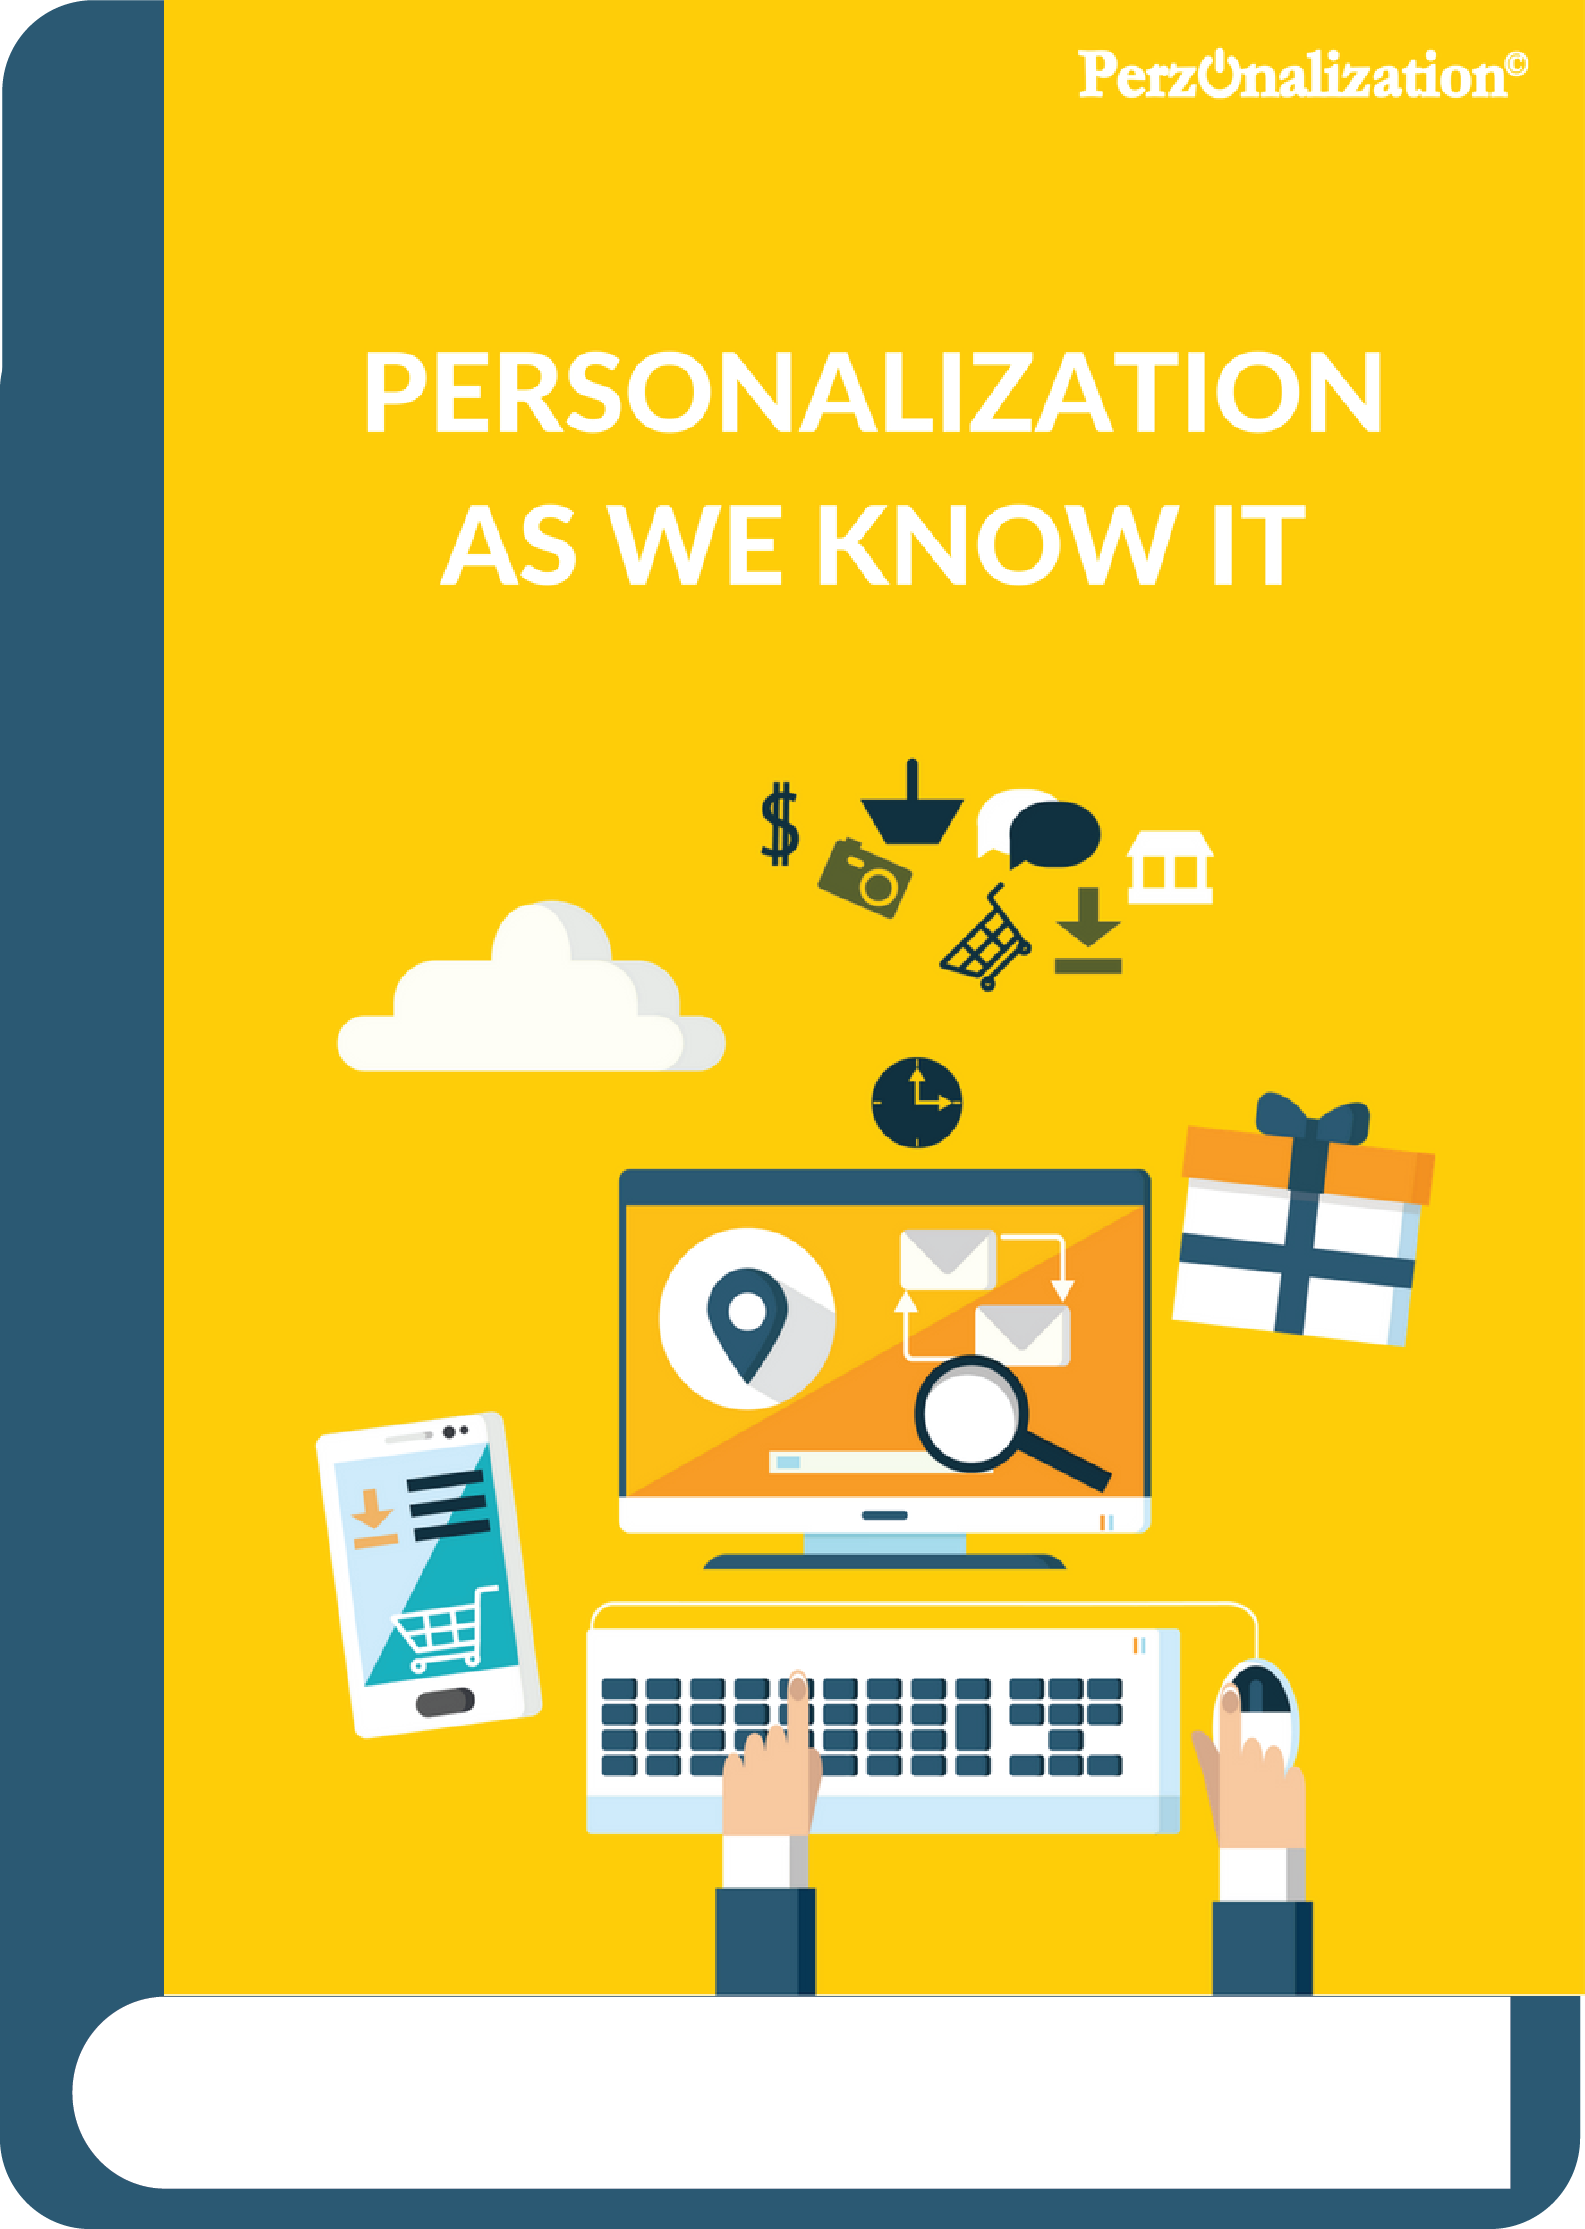 Personalization is creating experiences on web sites or through interactive media that are unique to individuals or segments of consumers. The job of personalization systems is to predict what the visitor is looking for on that page and then choose the most relevant content for her. In this eBook, you’re going to discover different types of personalization and how eCommerce websites use this tool.